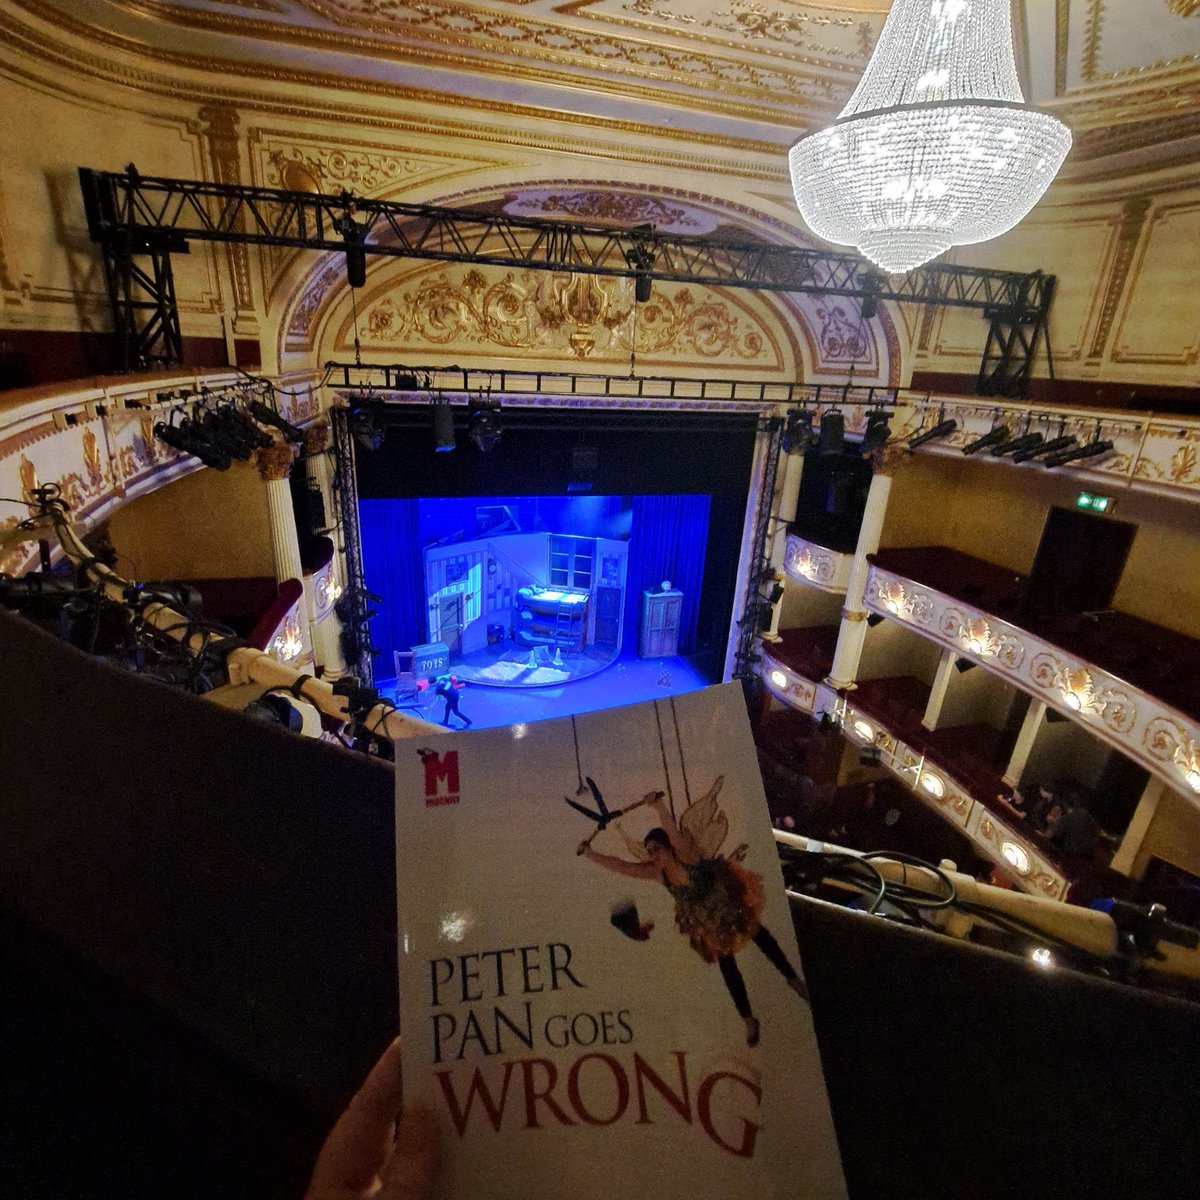 Oh it tis fab and silly and just perfect for a Saturday afternoon…do go! @mischiefcomedy #saturdaymatinee #inthebigsmoke #itdidactuallygowrong #buttheshowdidgoon